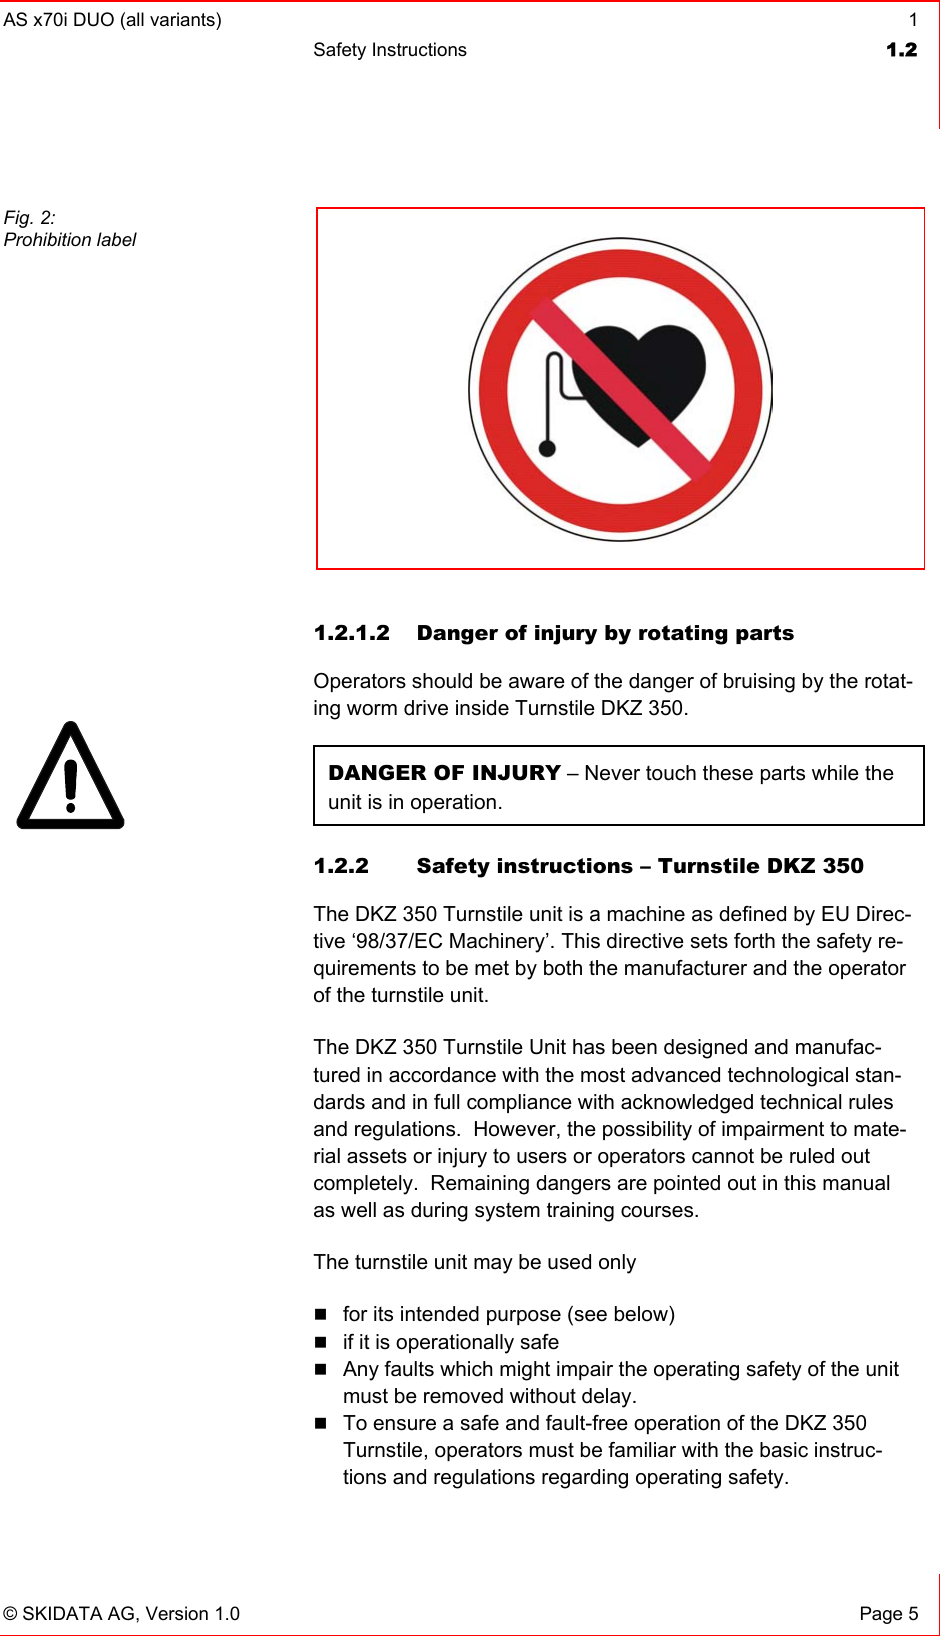 AS x70i DUO (all variants)  1 Safety Instructions  1.2   © SKIDATA AG, Version 1.0  Page 5   1.2.1.2  Danger of injury by rotating parts Operators should be aware of the danger of bruising by the rotat-ing worm drive inside Turnstile DKZ 350. DANGER OF INJURY – Never touch these parts while the unit is in operation. 1.2.2  Safety instructions – Turnstile DKZ 350 The DKZ 350 Turnstile unit is a machine as defined by EU Direc-tive ‘98/37/EC Machinery’. This directive sets forth the safety re-quirements to be met by both the manufacturer and the operator of the turnstile unit. The DKZ 350 Turnstile Unit has been designed and manufac-tured in accordance with the most advanced technological stan-dards and in full compliance with acknowledged technical rules and regulations.  However, the possibility of impairment to mate-rial assets or injury to users or operators cannot be ruled out completely.  Remaining dangers are pointed out in this manual as well as during system training courses. The turnstile unit may be used only  for its intended purpose (see below)  if it is operationally safe  Any faults which might impair the operating safety of the unit must be removed without delay.  To ensure a safe and fault-free operation of the DKZ 350 Turnstile, operators must be familiar with the basic instruc-tions and regulations regarding operating safety. Fig. 2: Prohibition label    